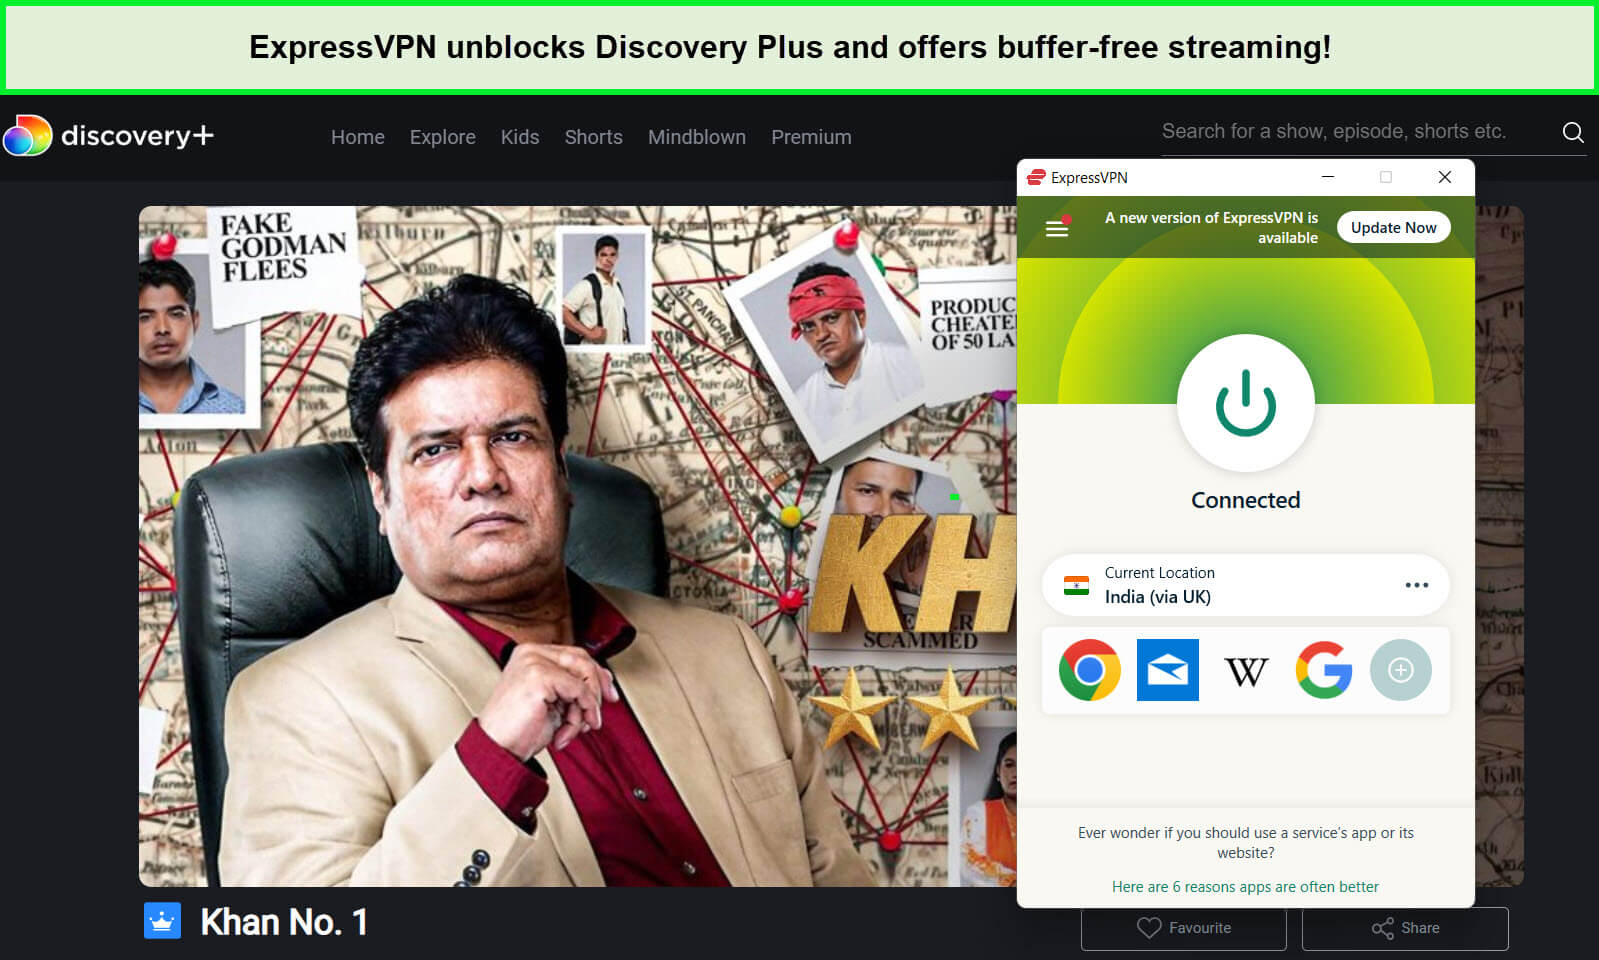 expressvpn-unblocks-khan-no-1-on-discovery-plus-in-canada